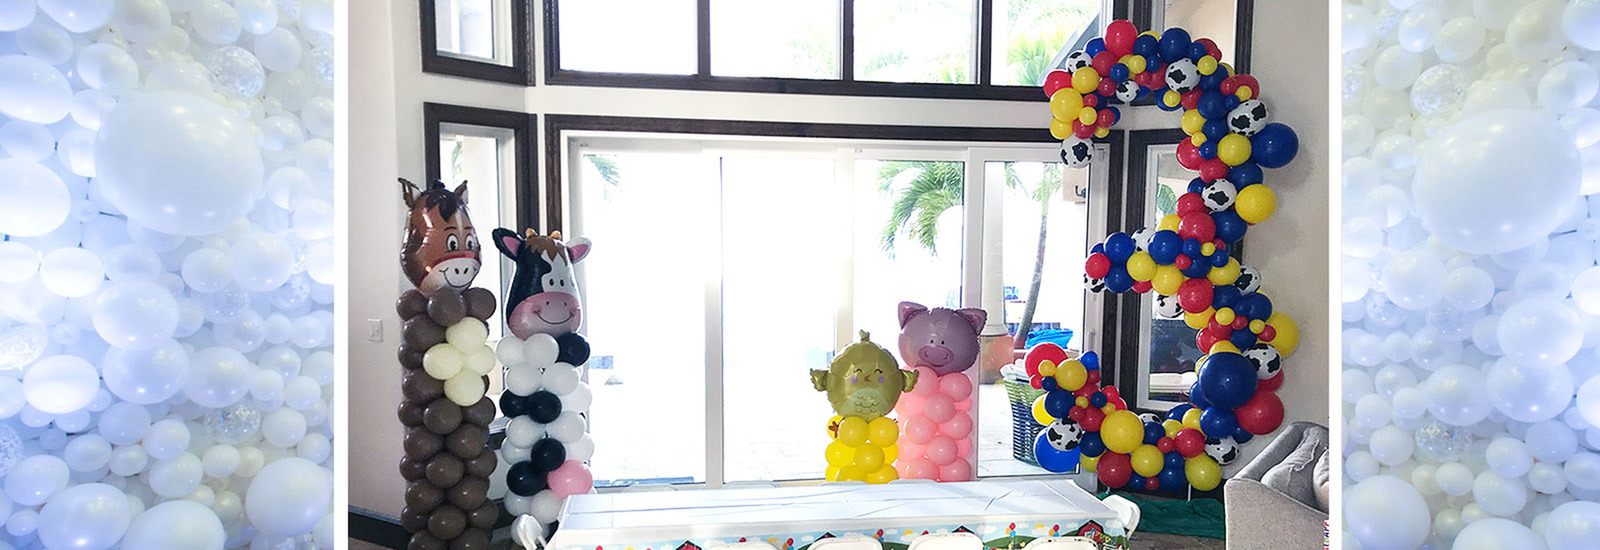 Kids Farm Theme Balloon Decor with Farm Animal Balloon Clumns and a Large number 3 Balloon Sculpture Indialantic FL by Blank Canvas Event Decor